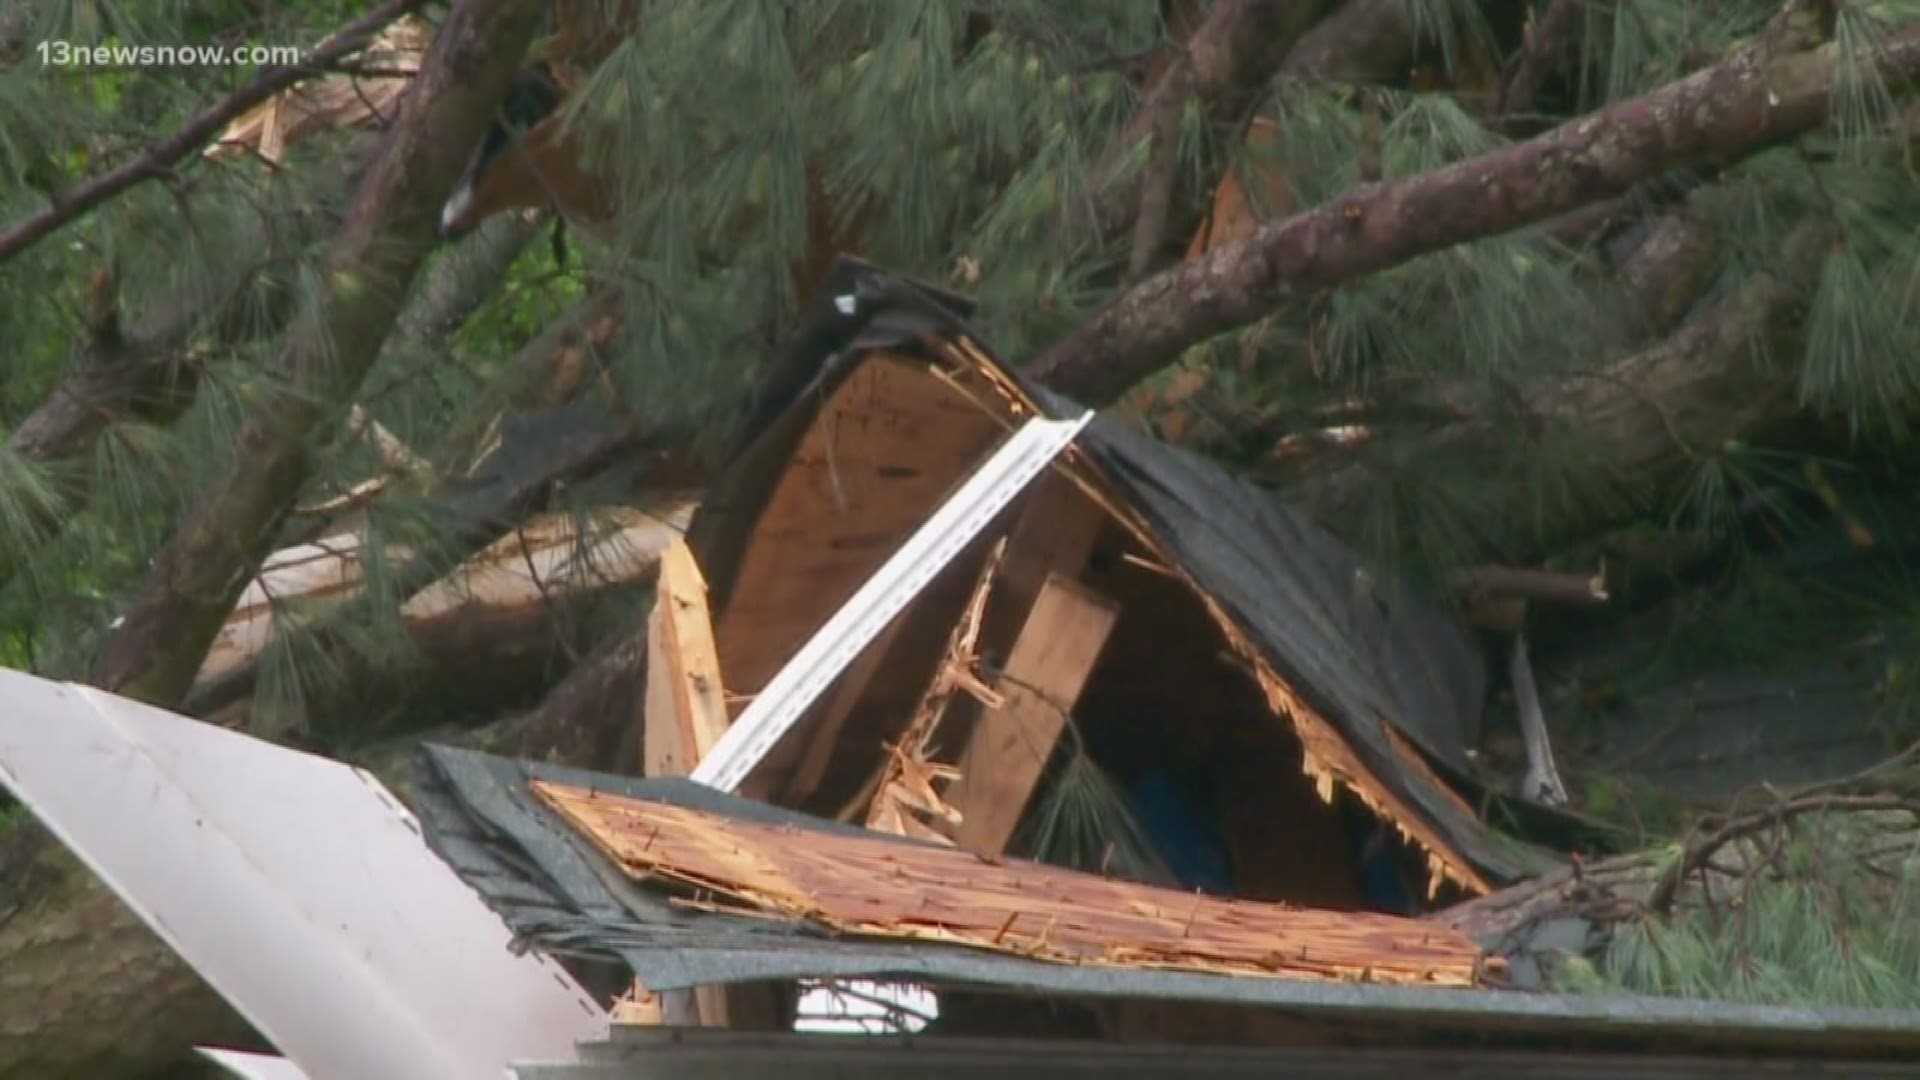 An EF-1 tornado tore through a Suffolk neighborhood Saturday. At least one family is displaced after trees crashed through their roof while others also work on cleaning up.